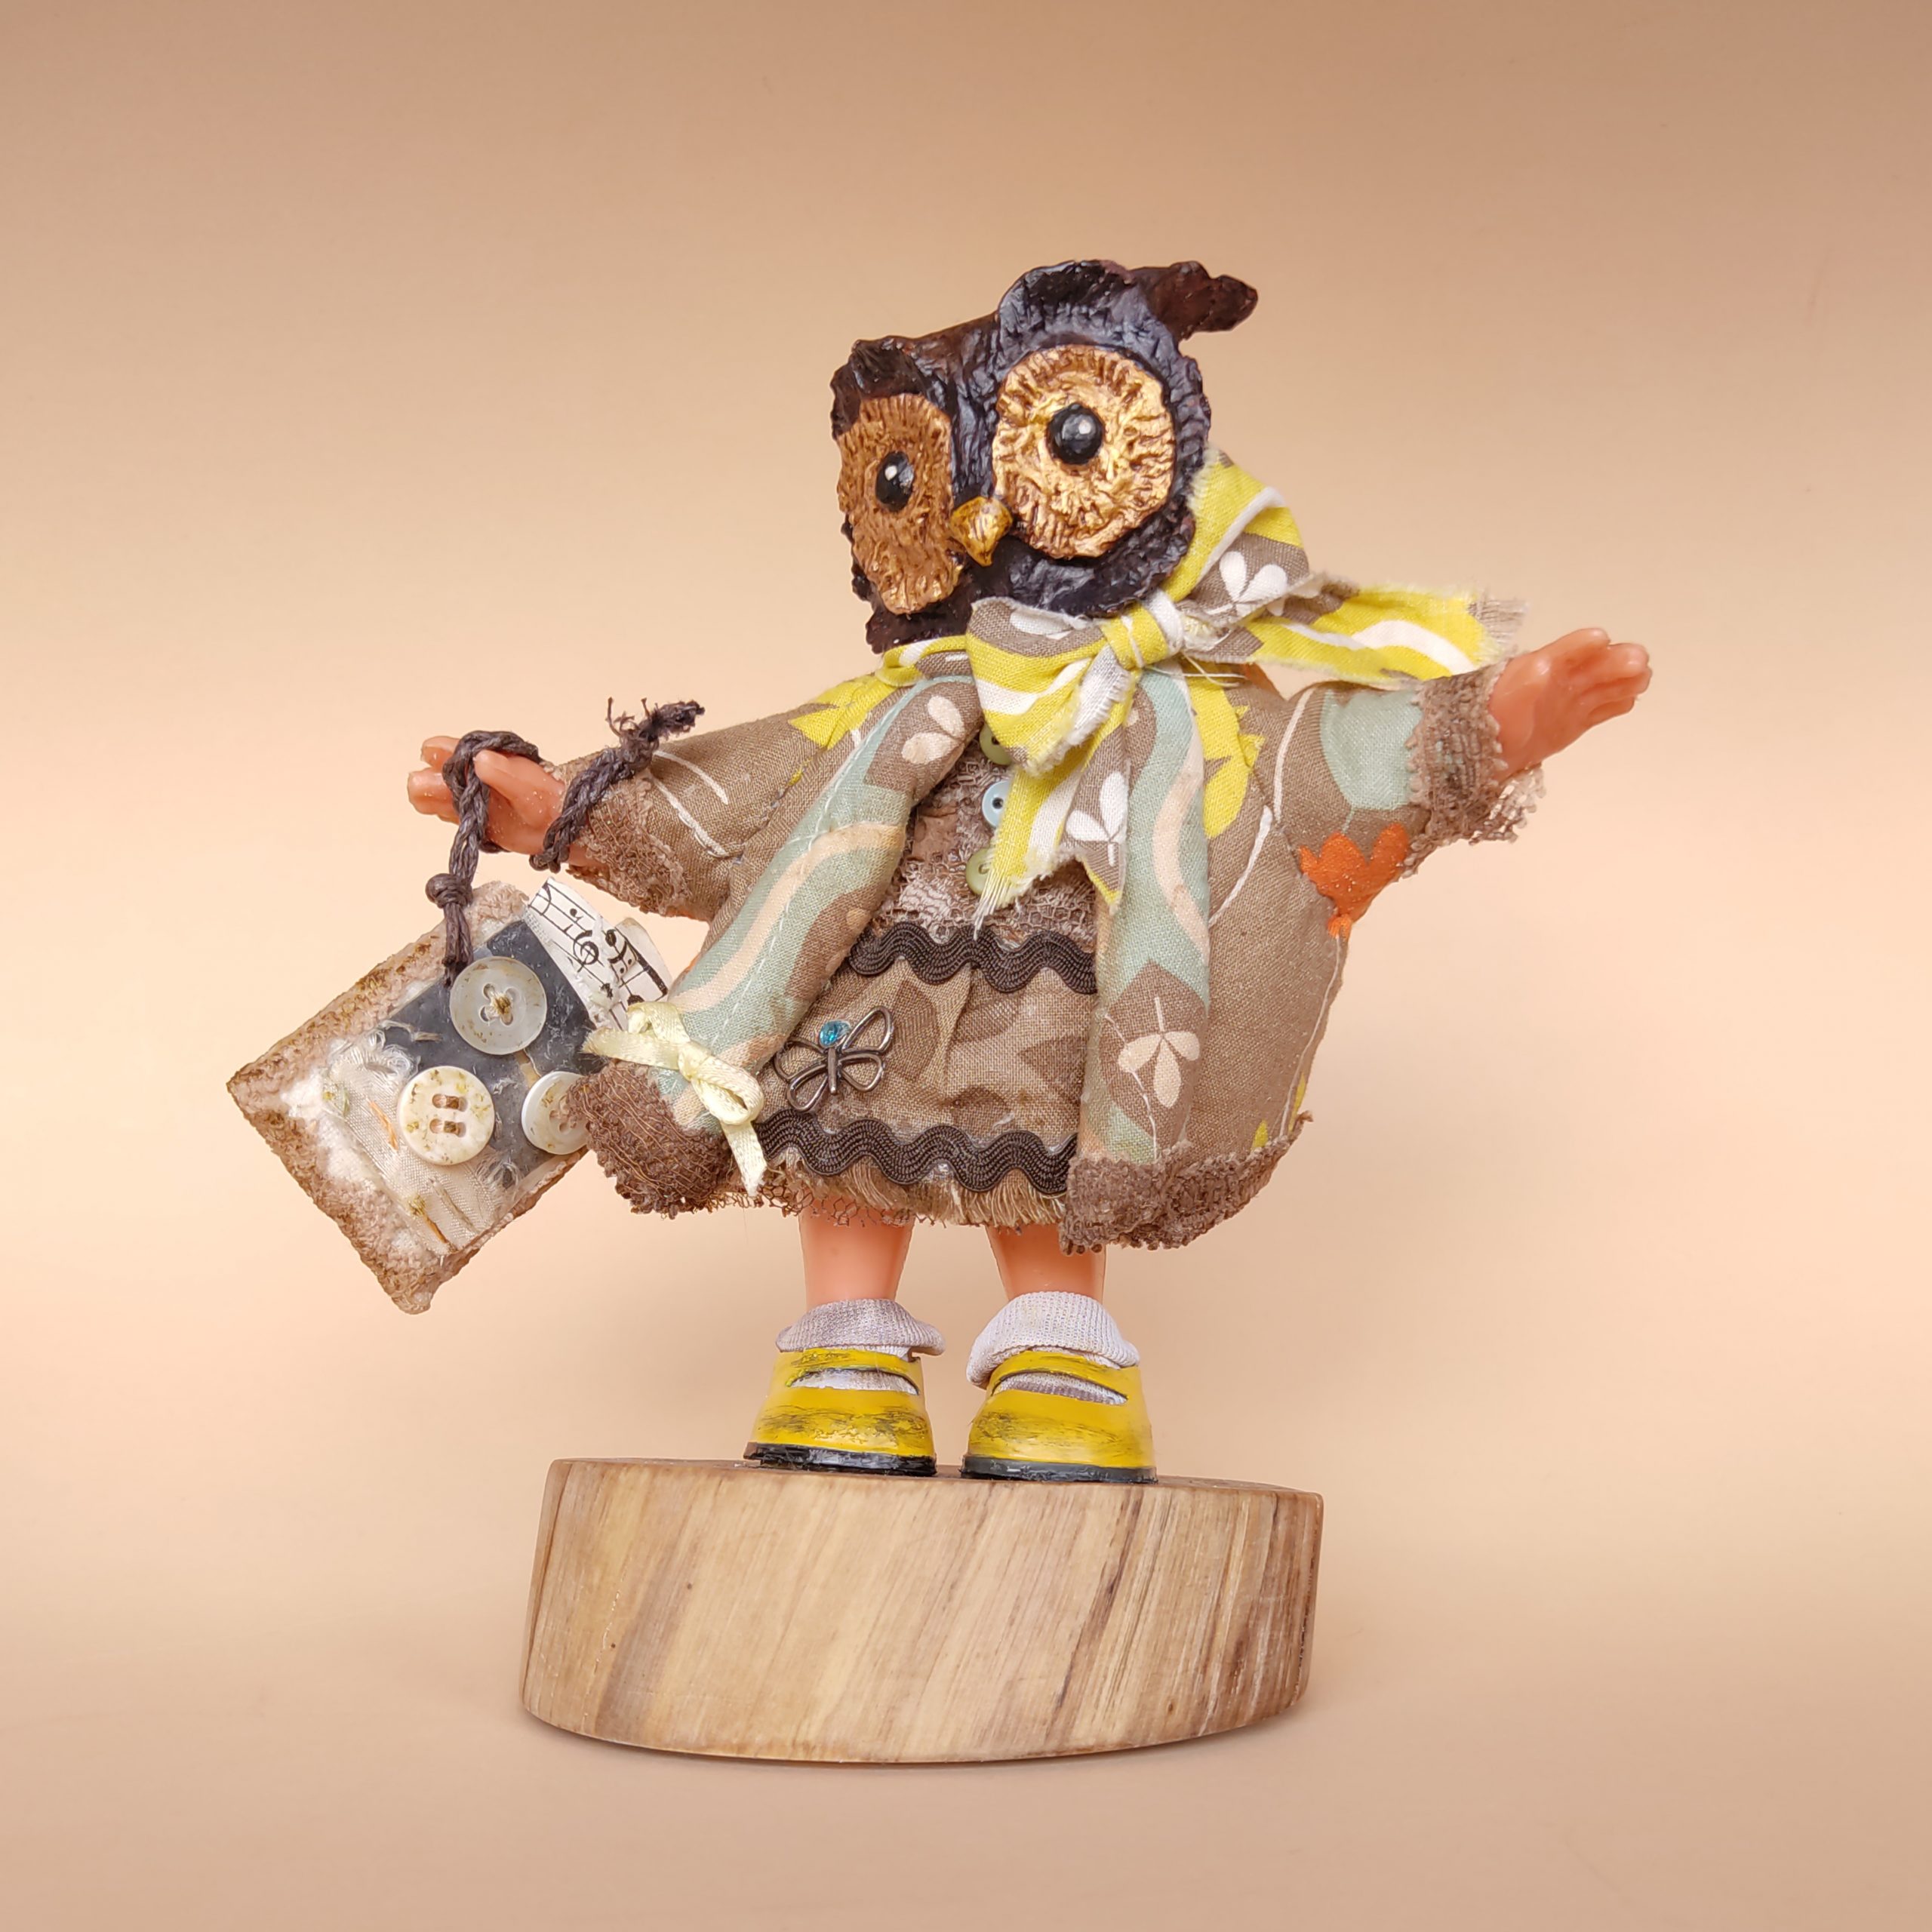 whimsical mixed media owl anthropomorphic doll with coat dress bag and yellow shoes